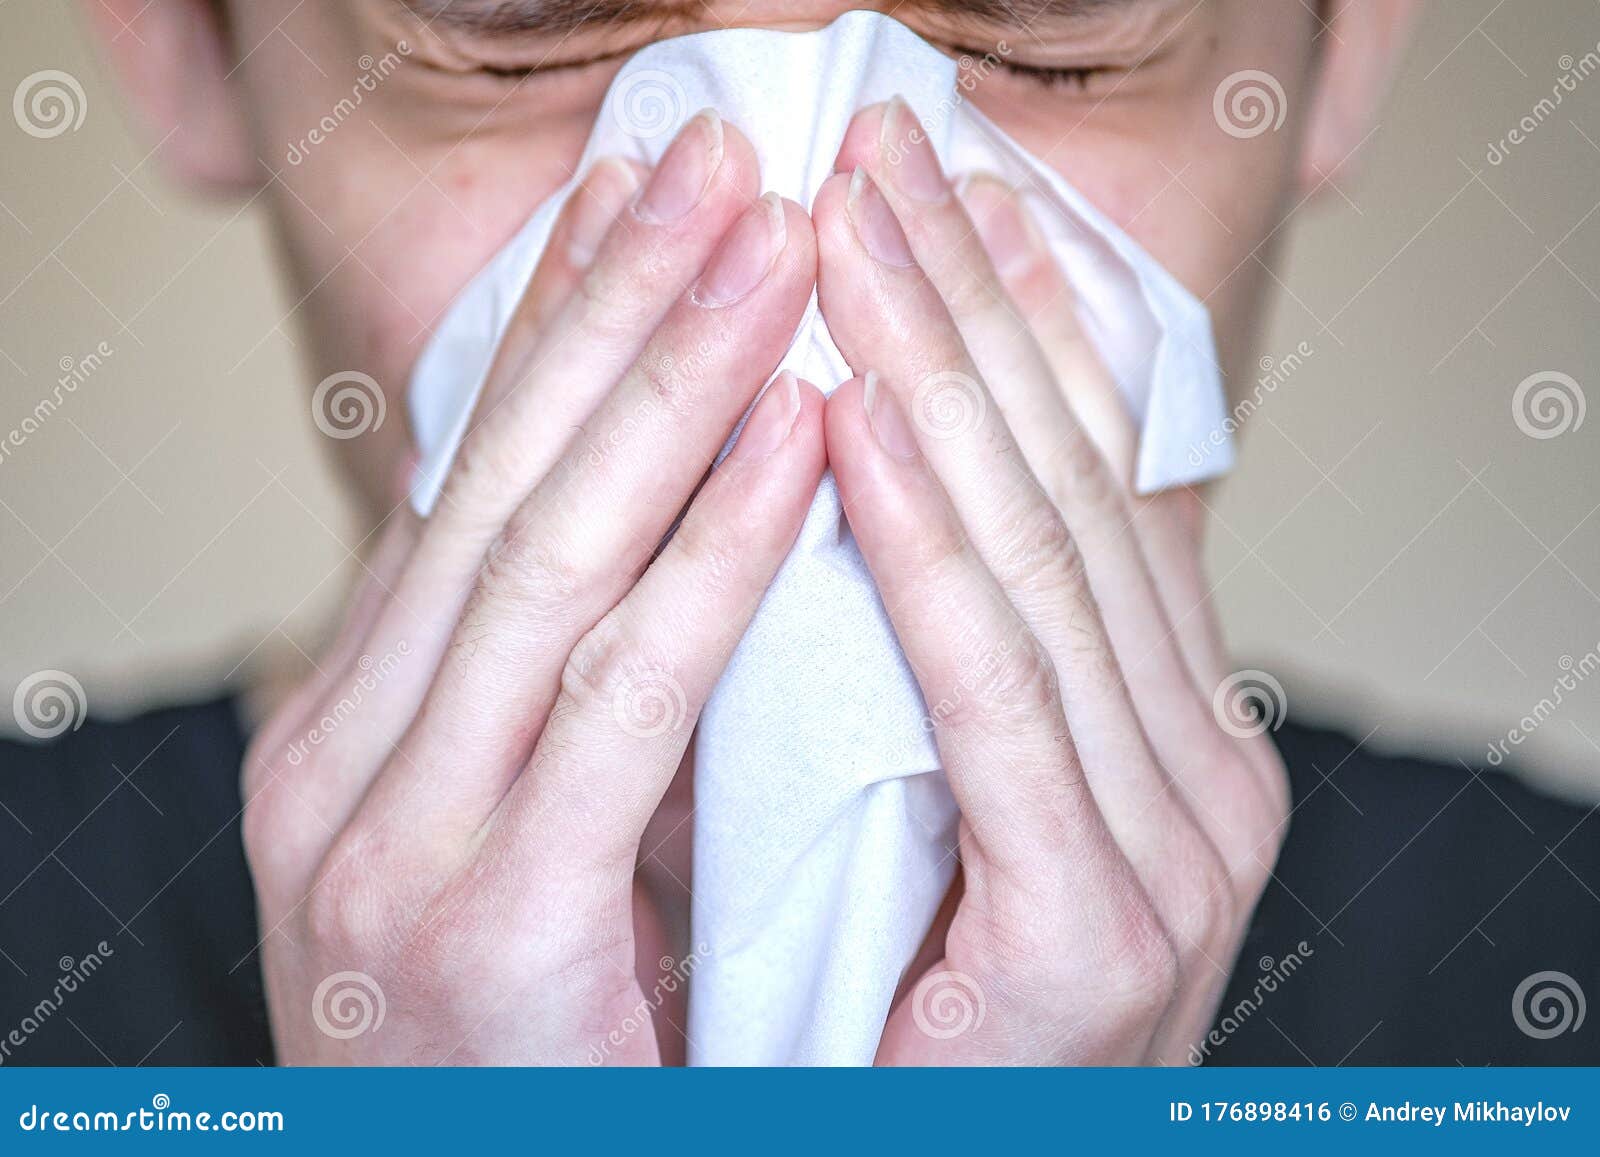 a person with symptoms of the disease presses a handkerchief to his face. sneezing, bouts of coughing